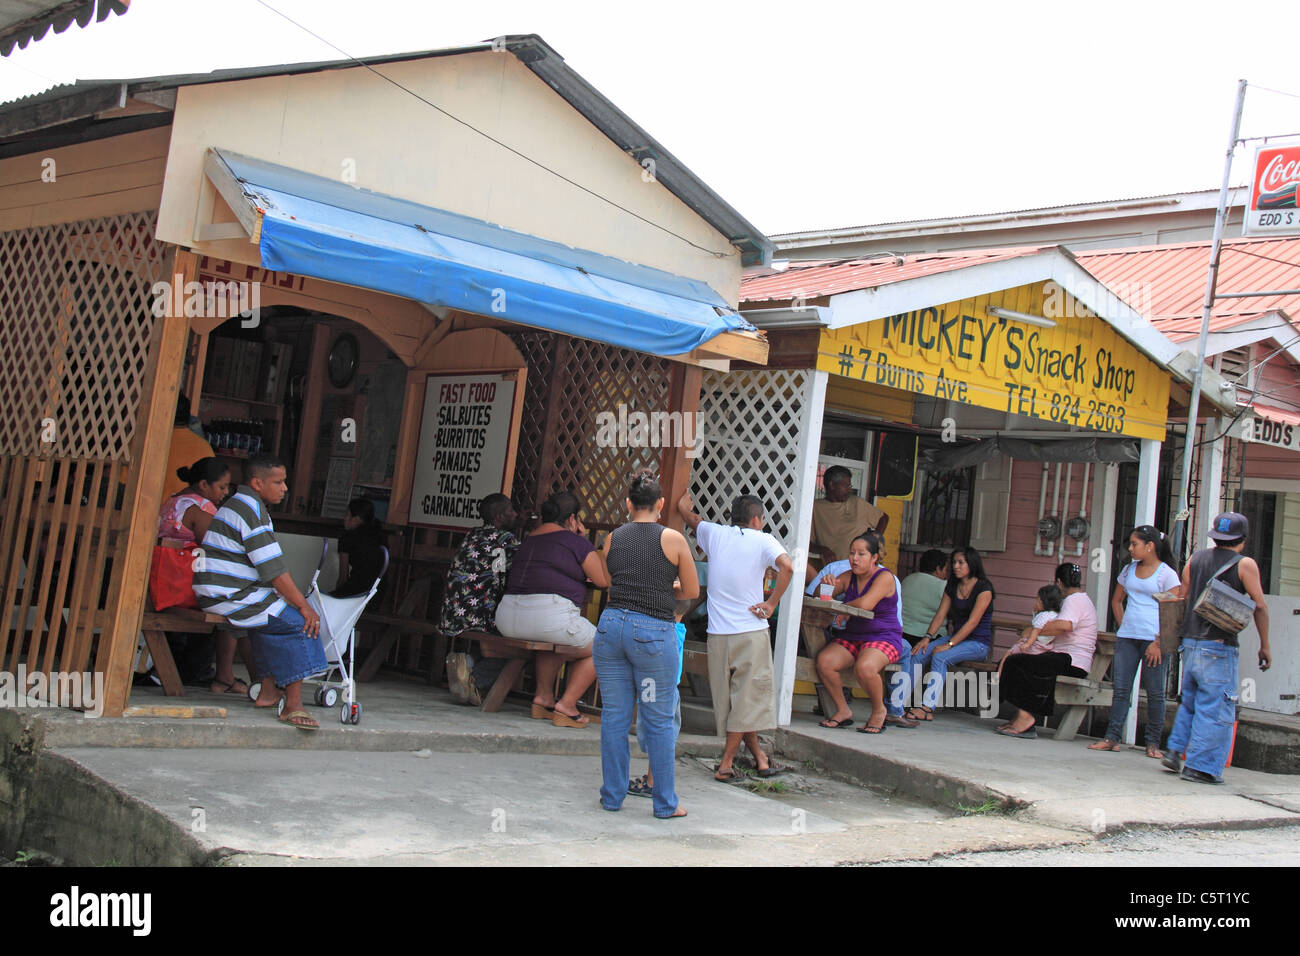 Mincho's and Mickey's fast food stalls on Burns Avenue in the town centre, San Ignacio, Cayo, west Belize, Central America Stock Photo